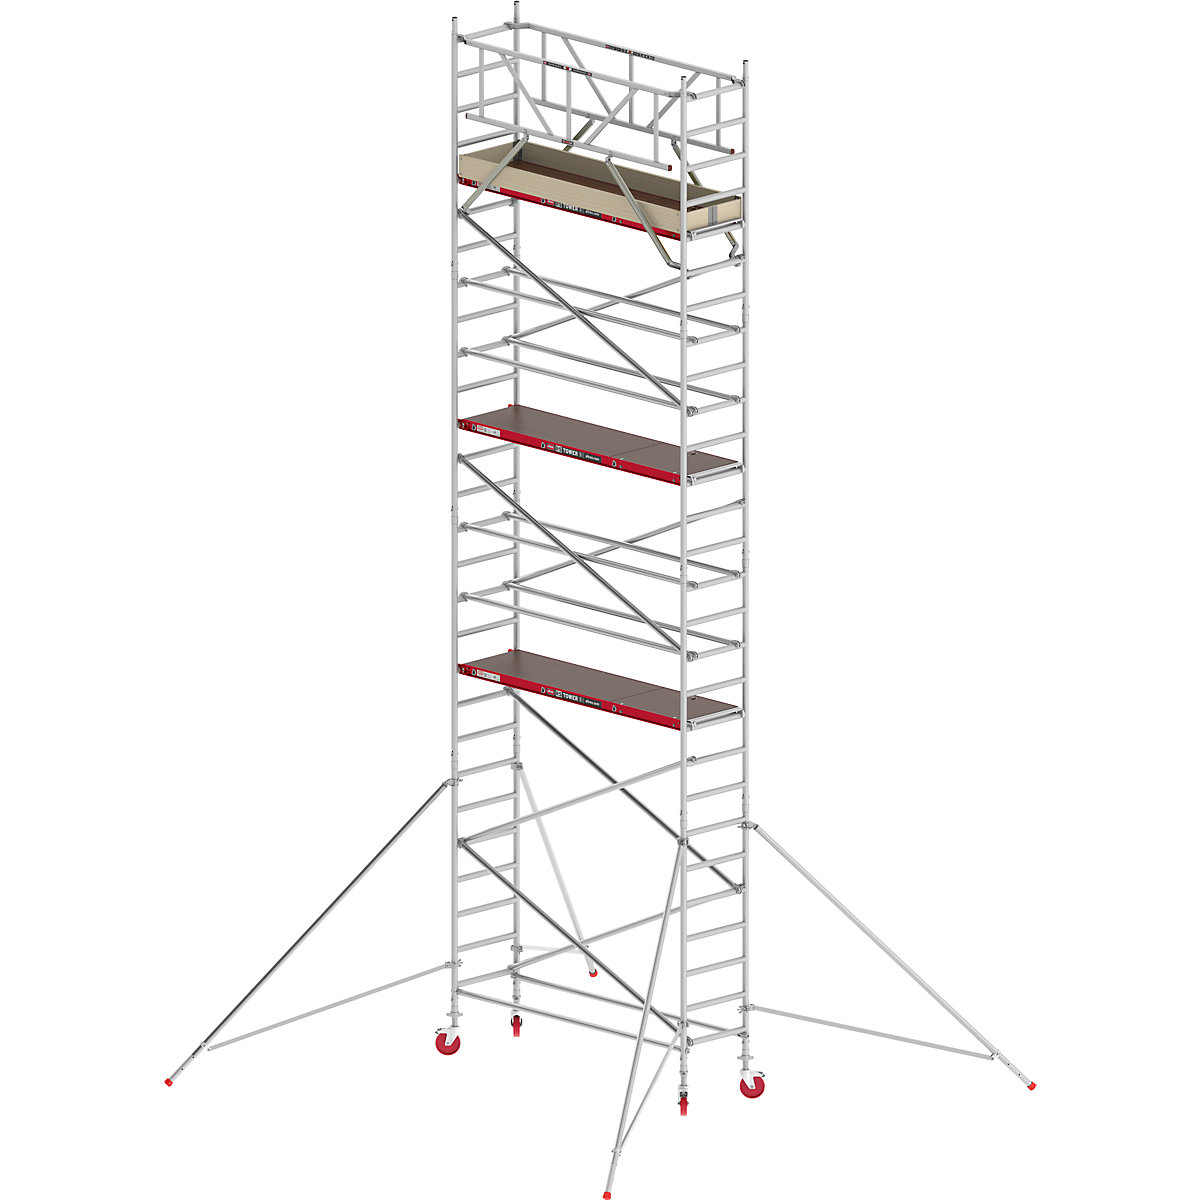 RS TOWER 41 slim mobile access tower – Altrex, wooden platform, length 1.85 m, working height 9.20 m-6